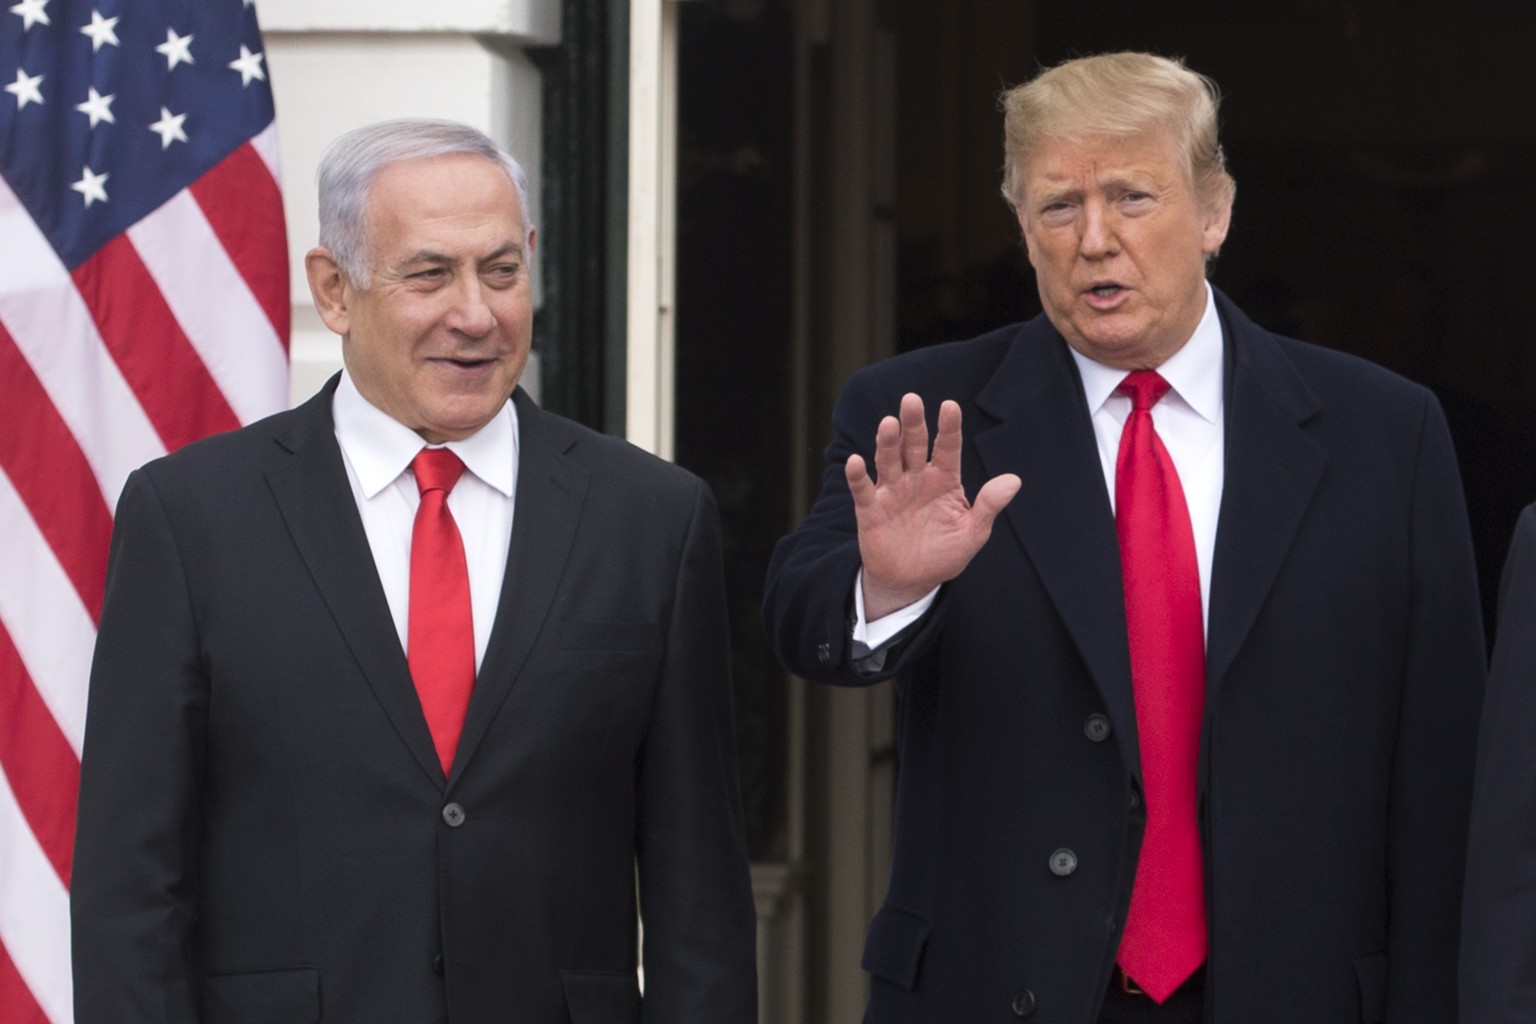 epa07462905 US President Donald J. Trump (R) waves beside Prime Minister of Israel Benjamin Netanyahu (L) while greeting him at the South Portico of the White House in Washington, DC, USA, 25 March 20 ...